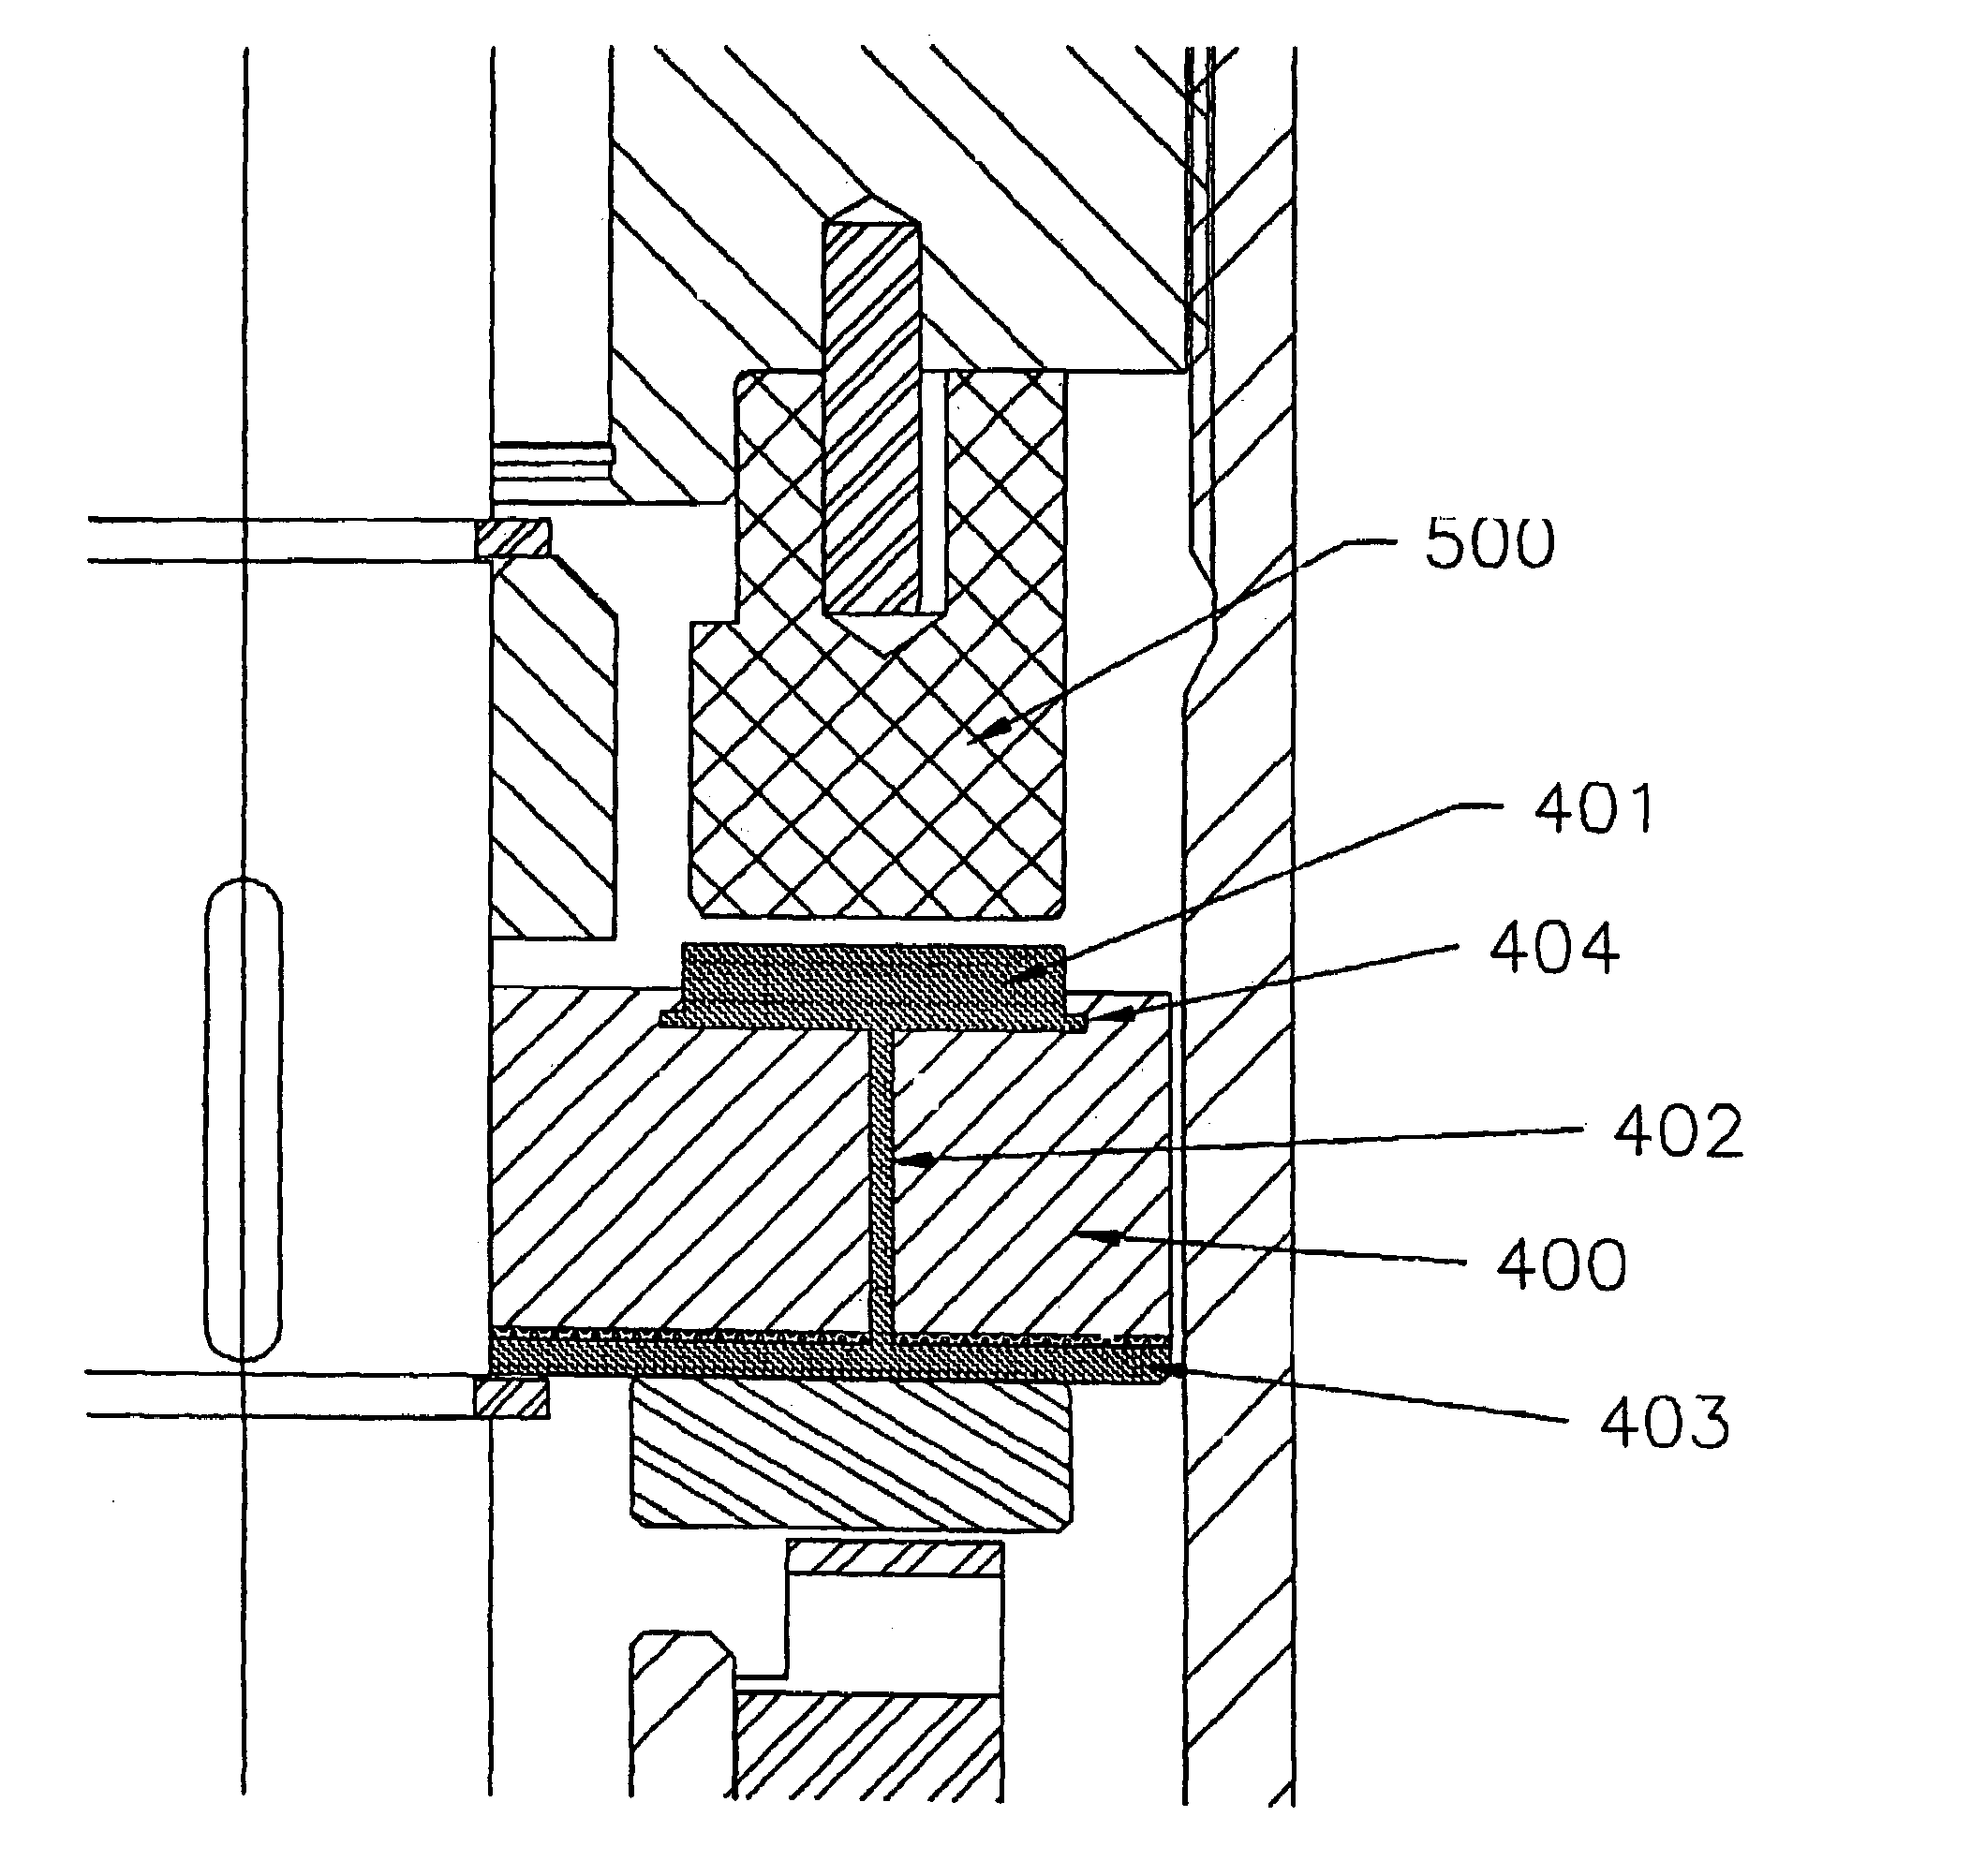 Hydrodynamic bearing runner for use in tilting pad thrust bearing assemblies for electric submersible pumps